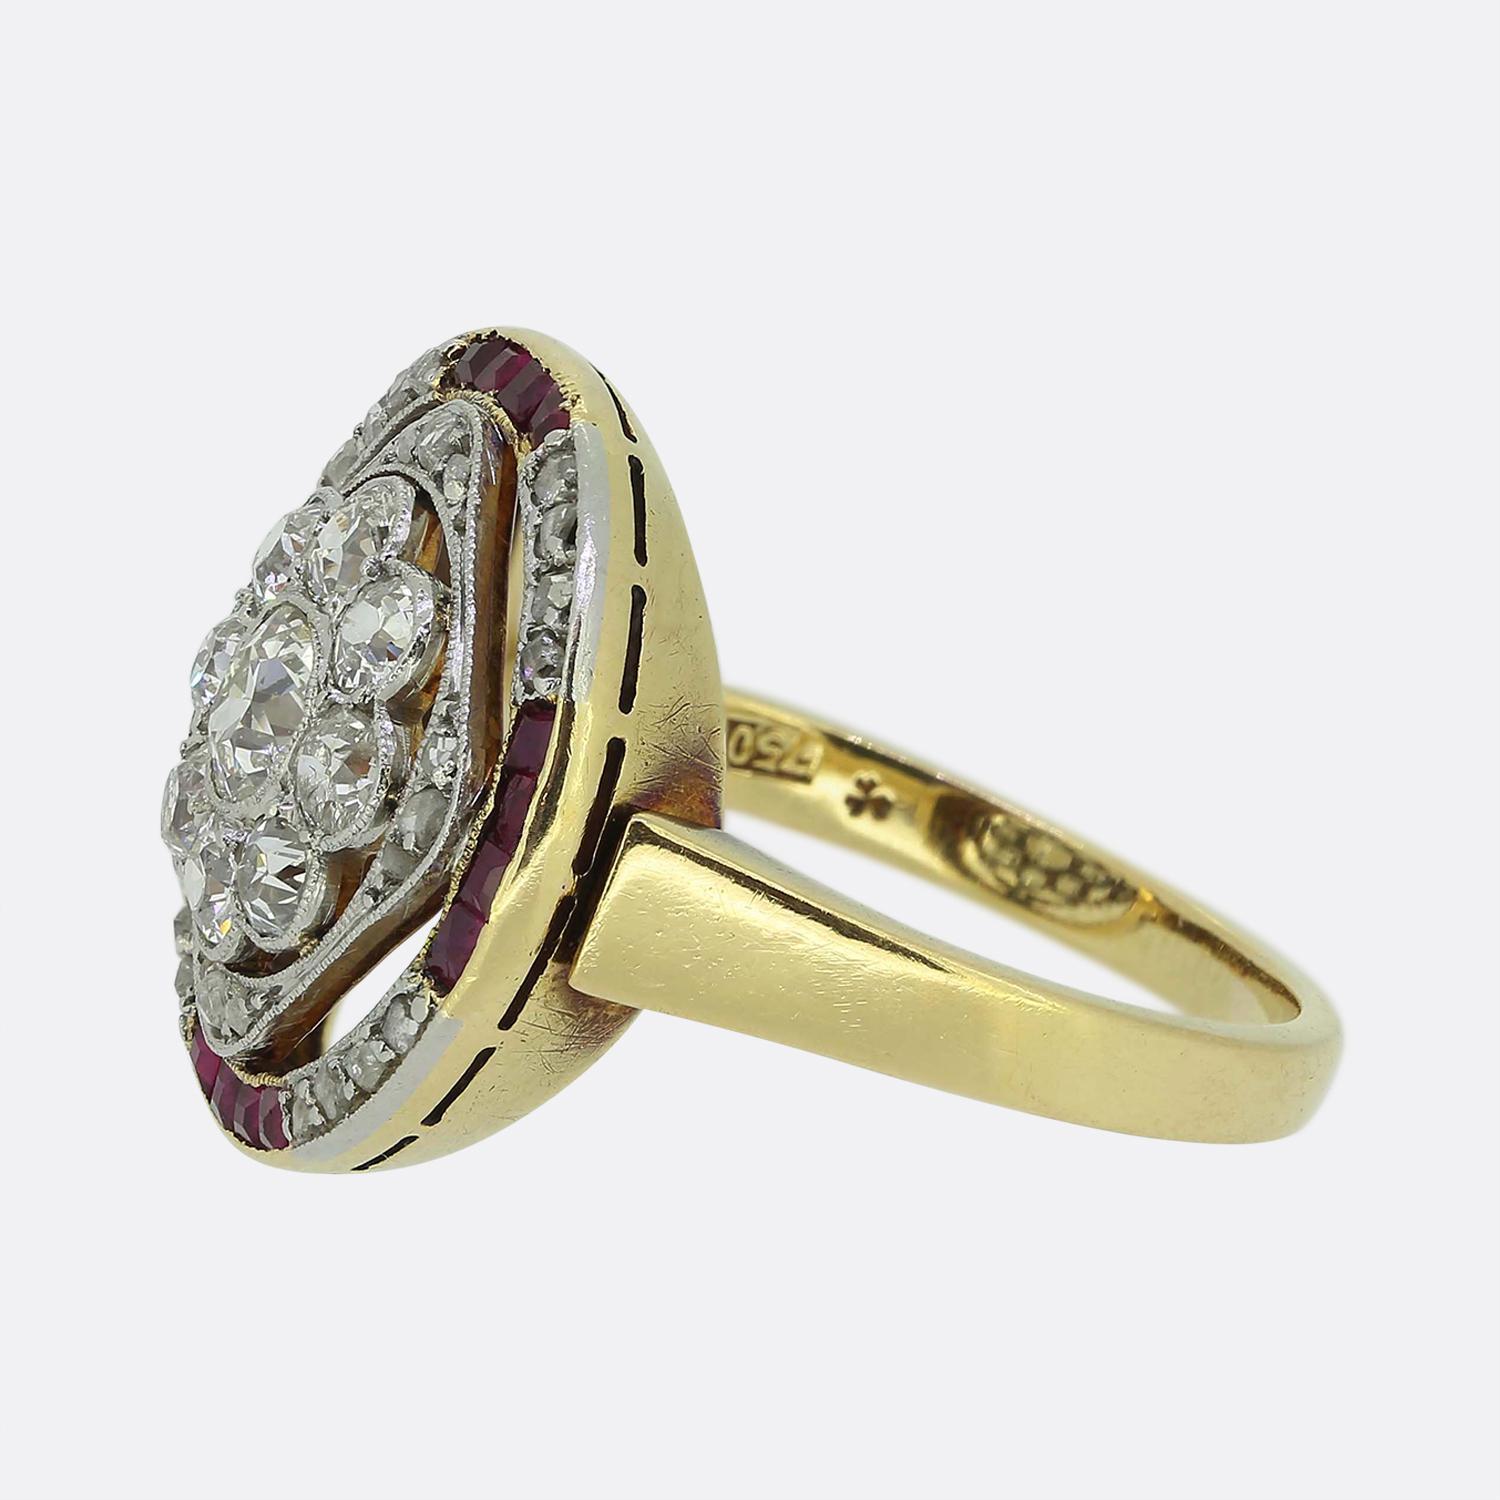 Here we have a marvellous ruby and diamond cluster ring crafted during the pinnacle of the Art Deco movement. A daisy cluster consisting of round faceted old European cut diamonds sits at the centre of an open face which is contained, firstly, by a